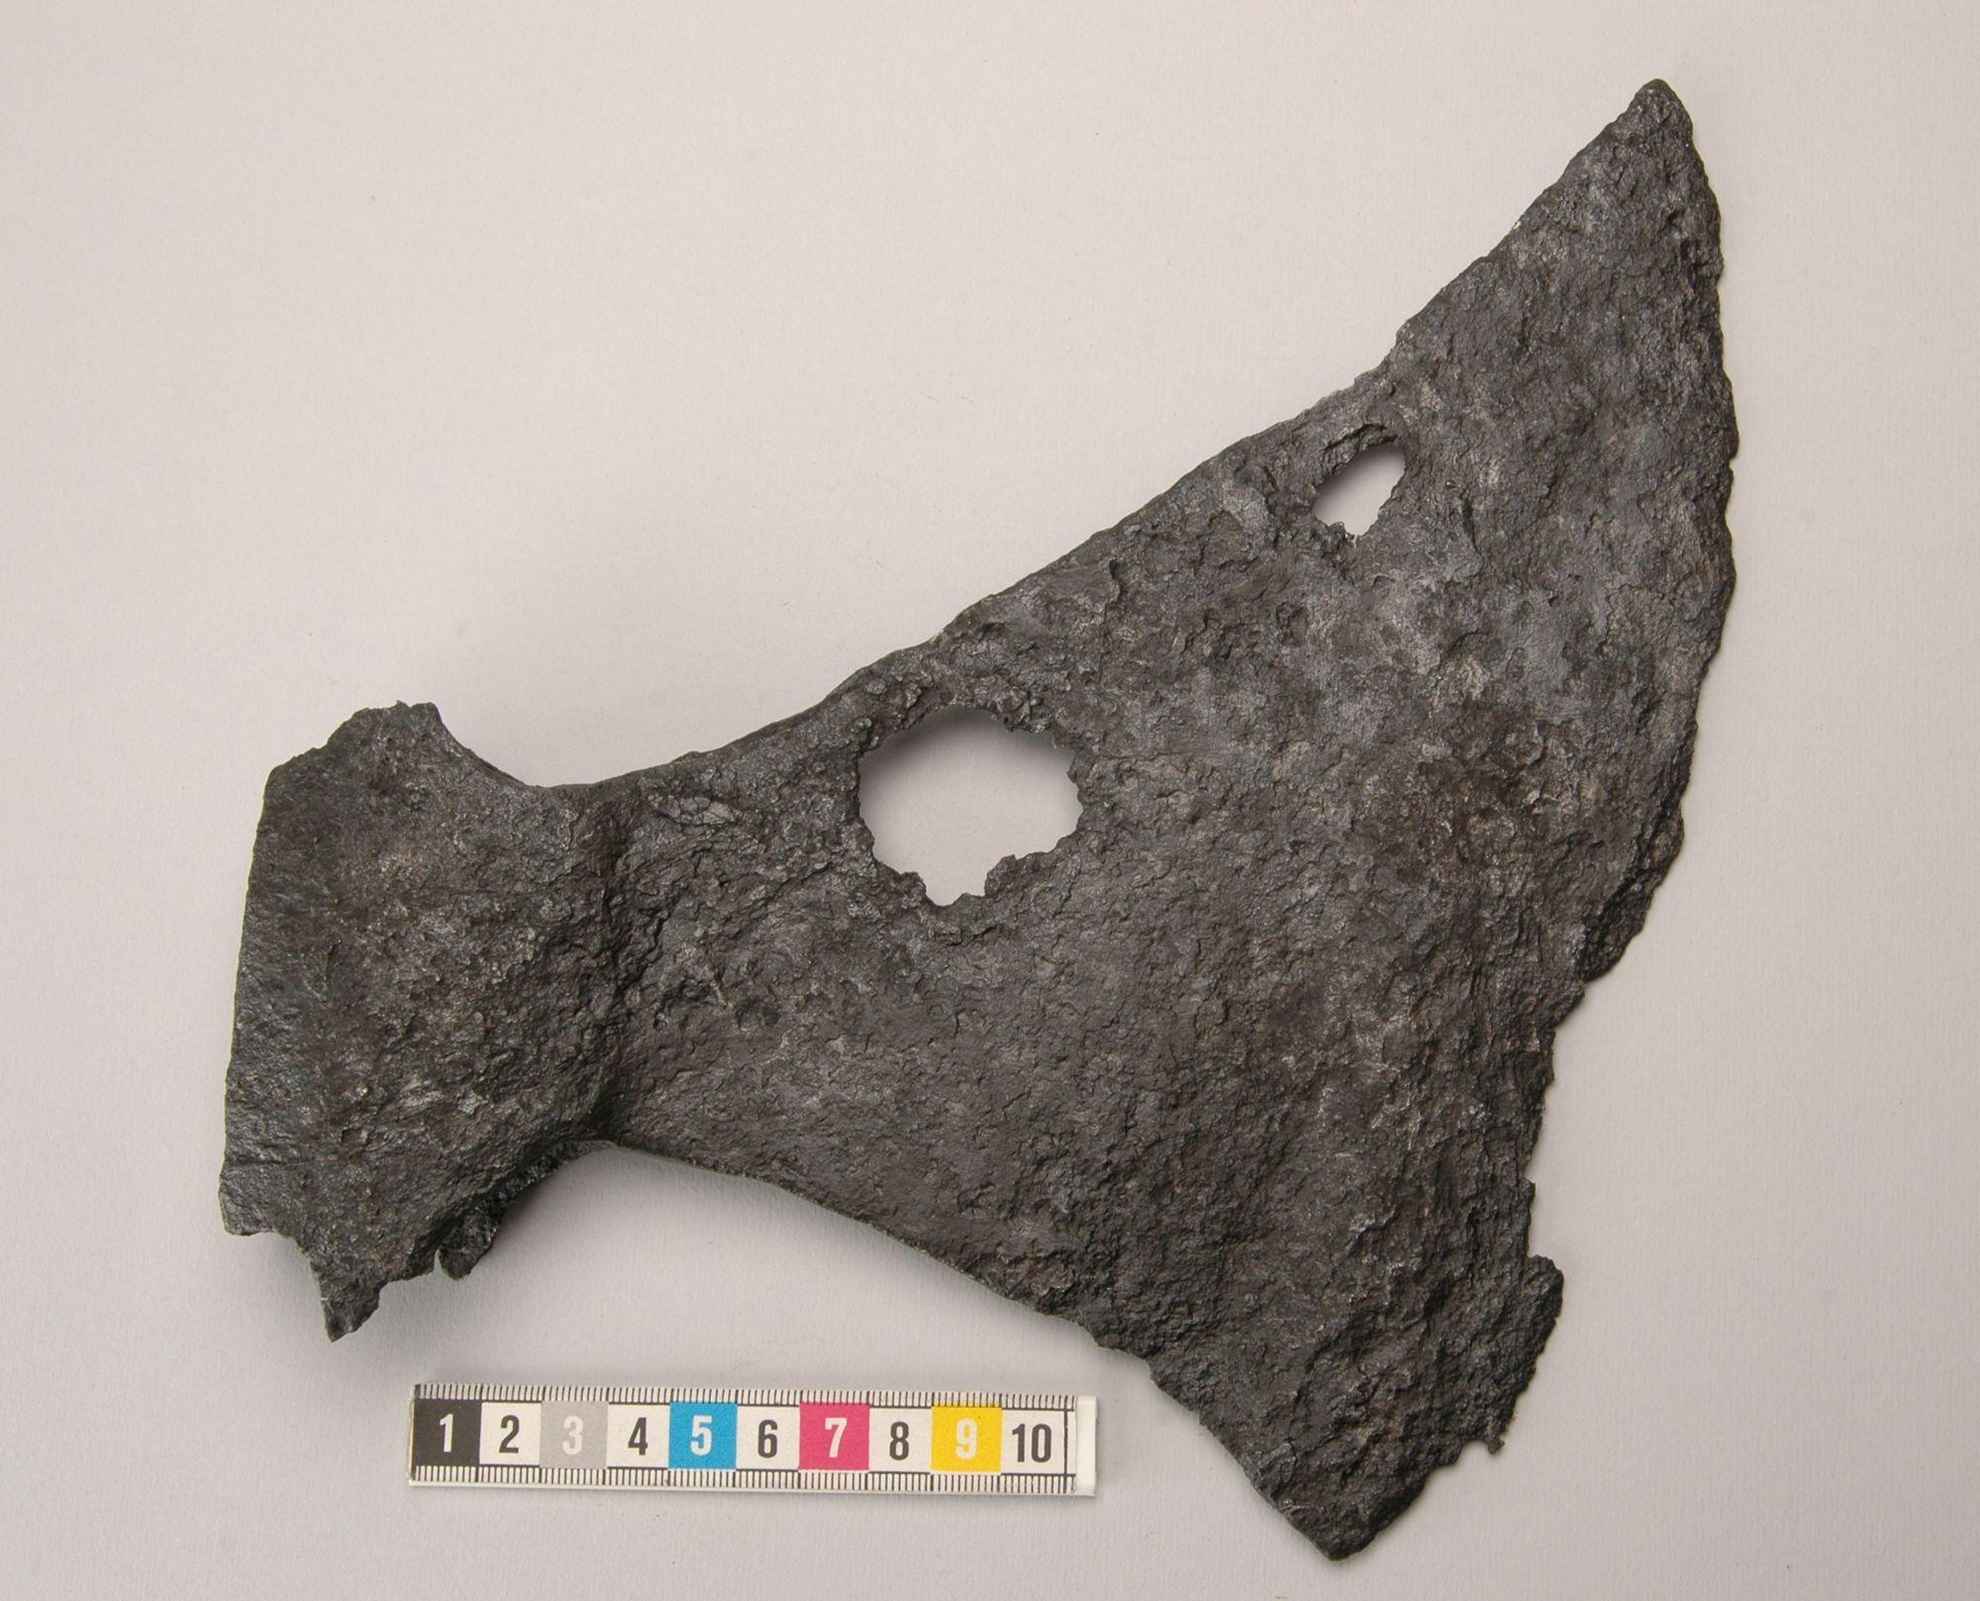 An old iron axe from the Viking age.